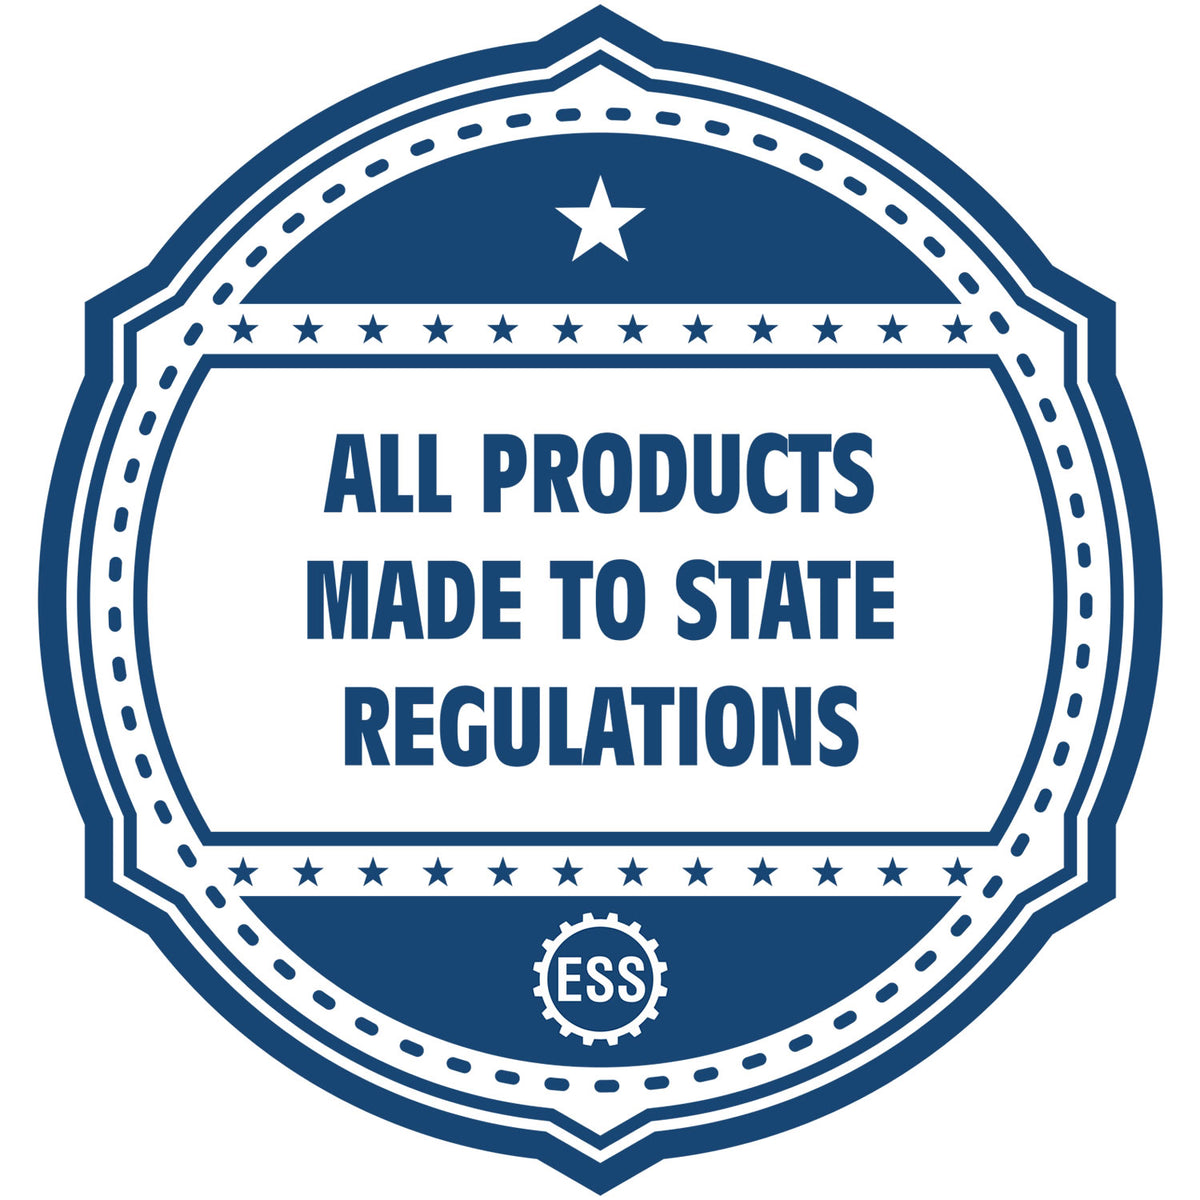 An icon or badge element for the Wooden Handle Massachusetts State Seal Notary Public Stamp showing that this product is made in compliance with state regulations.